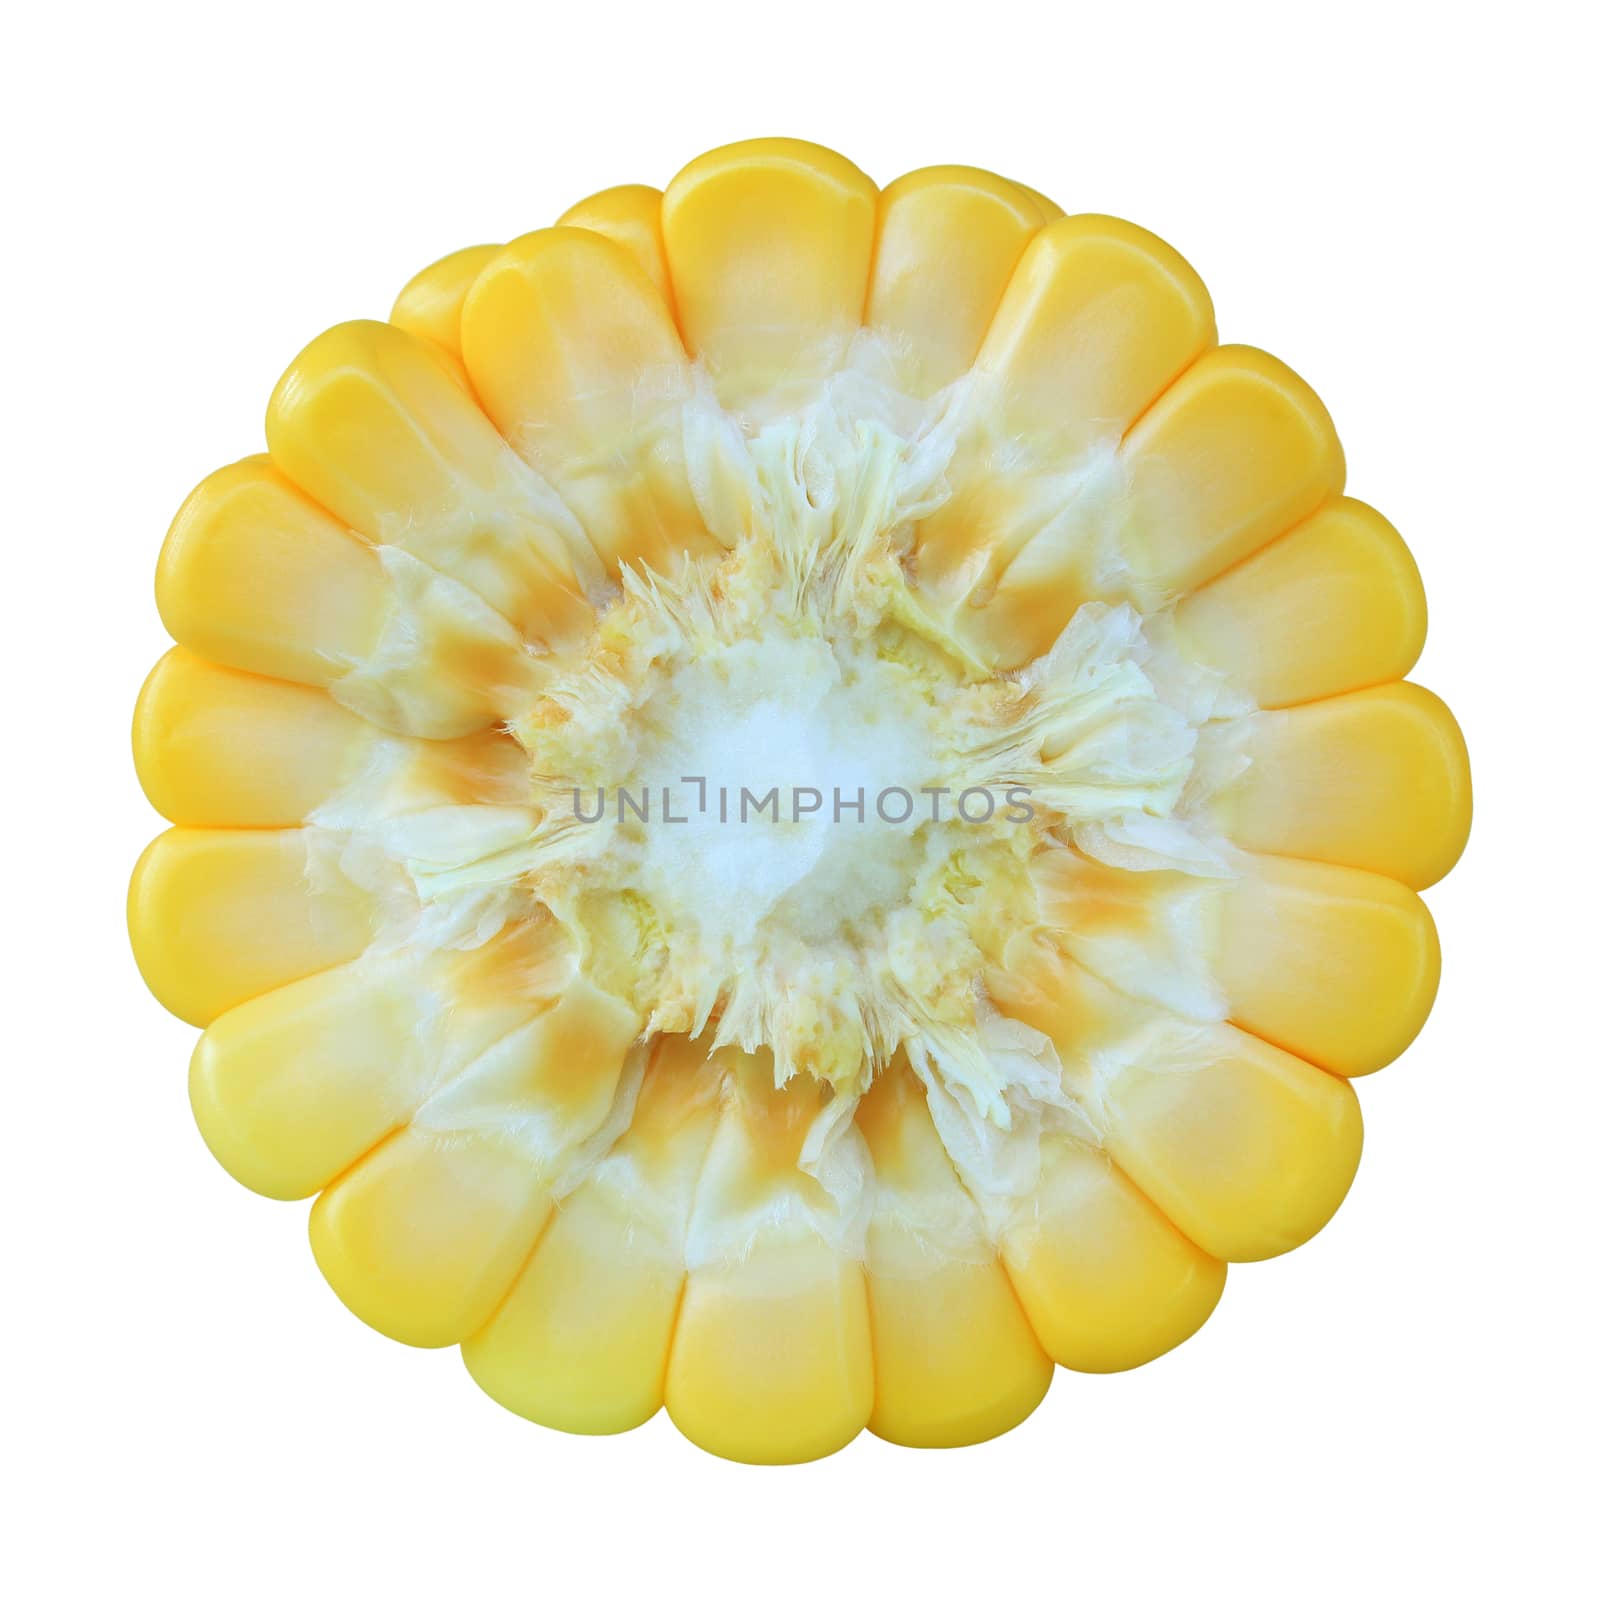 Ear of Corn isolated on white